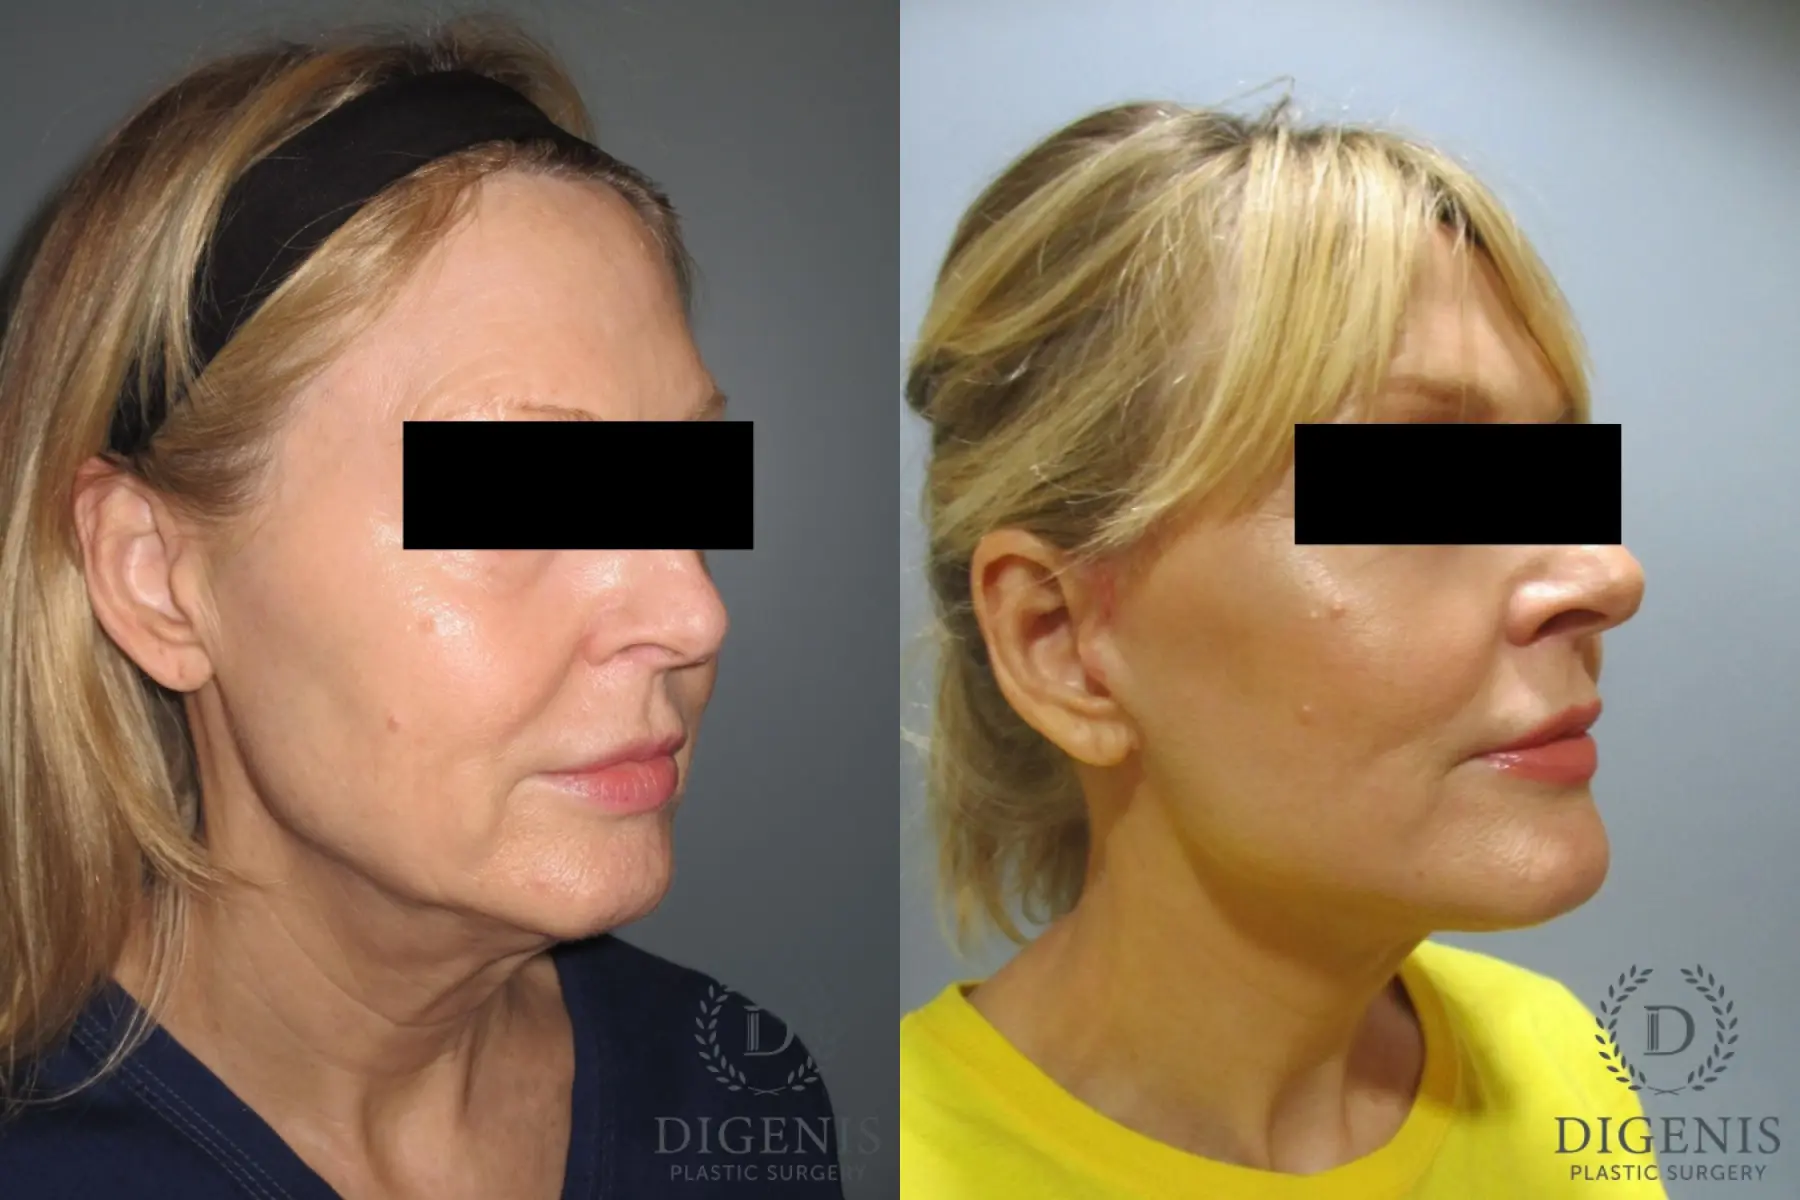 Facelift: Patient 6 - Before and After 2